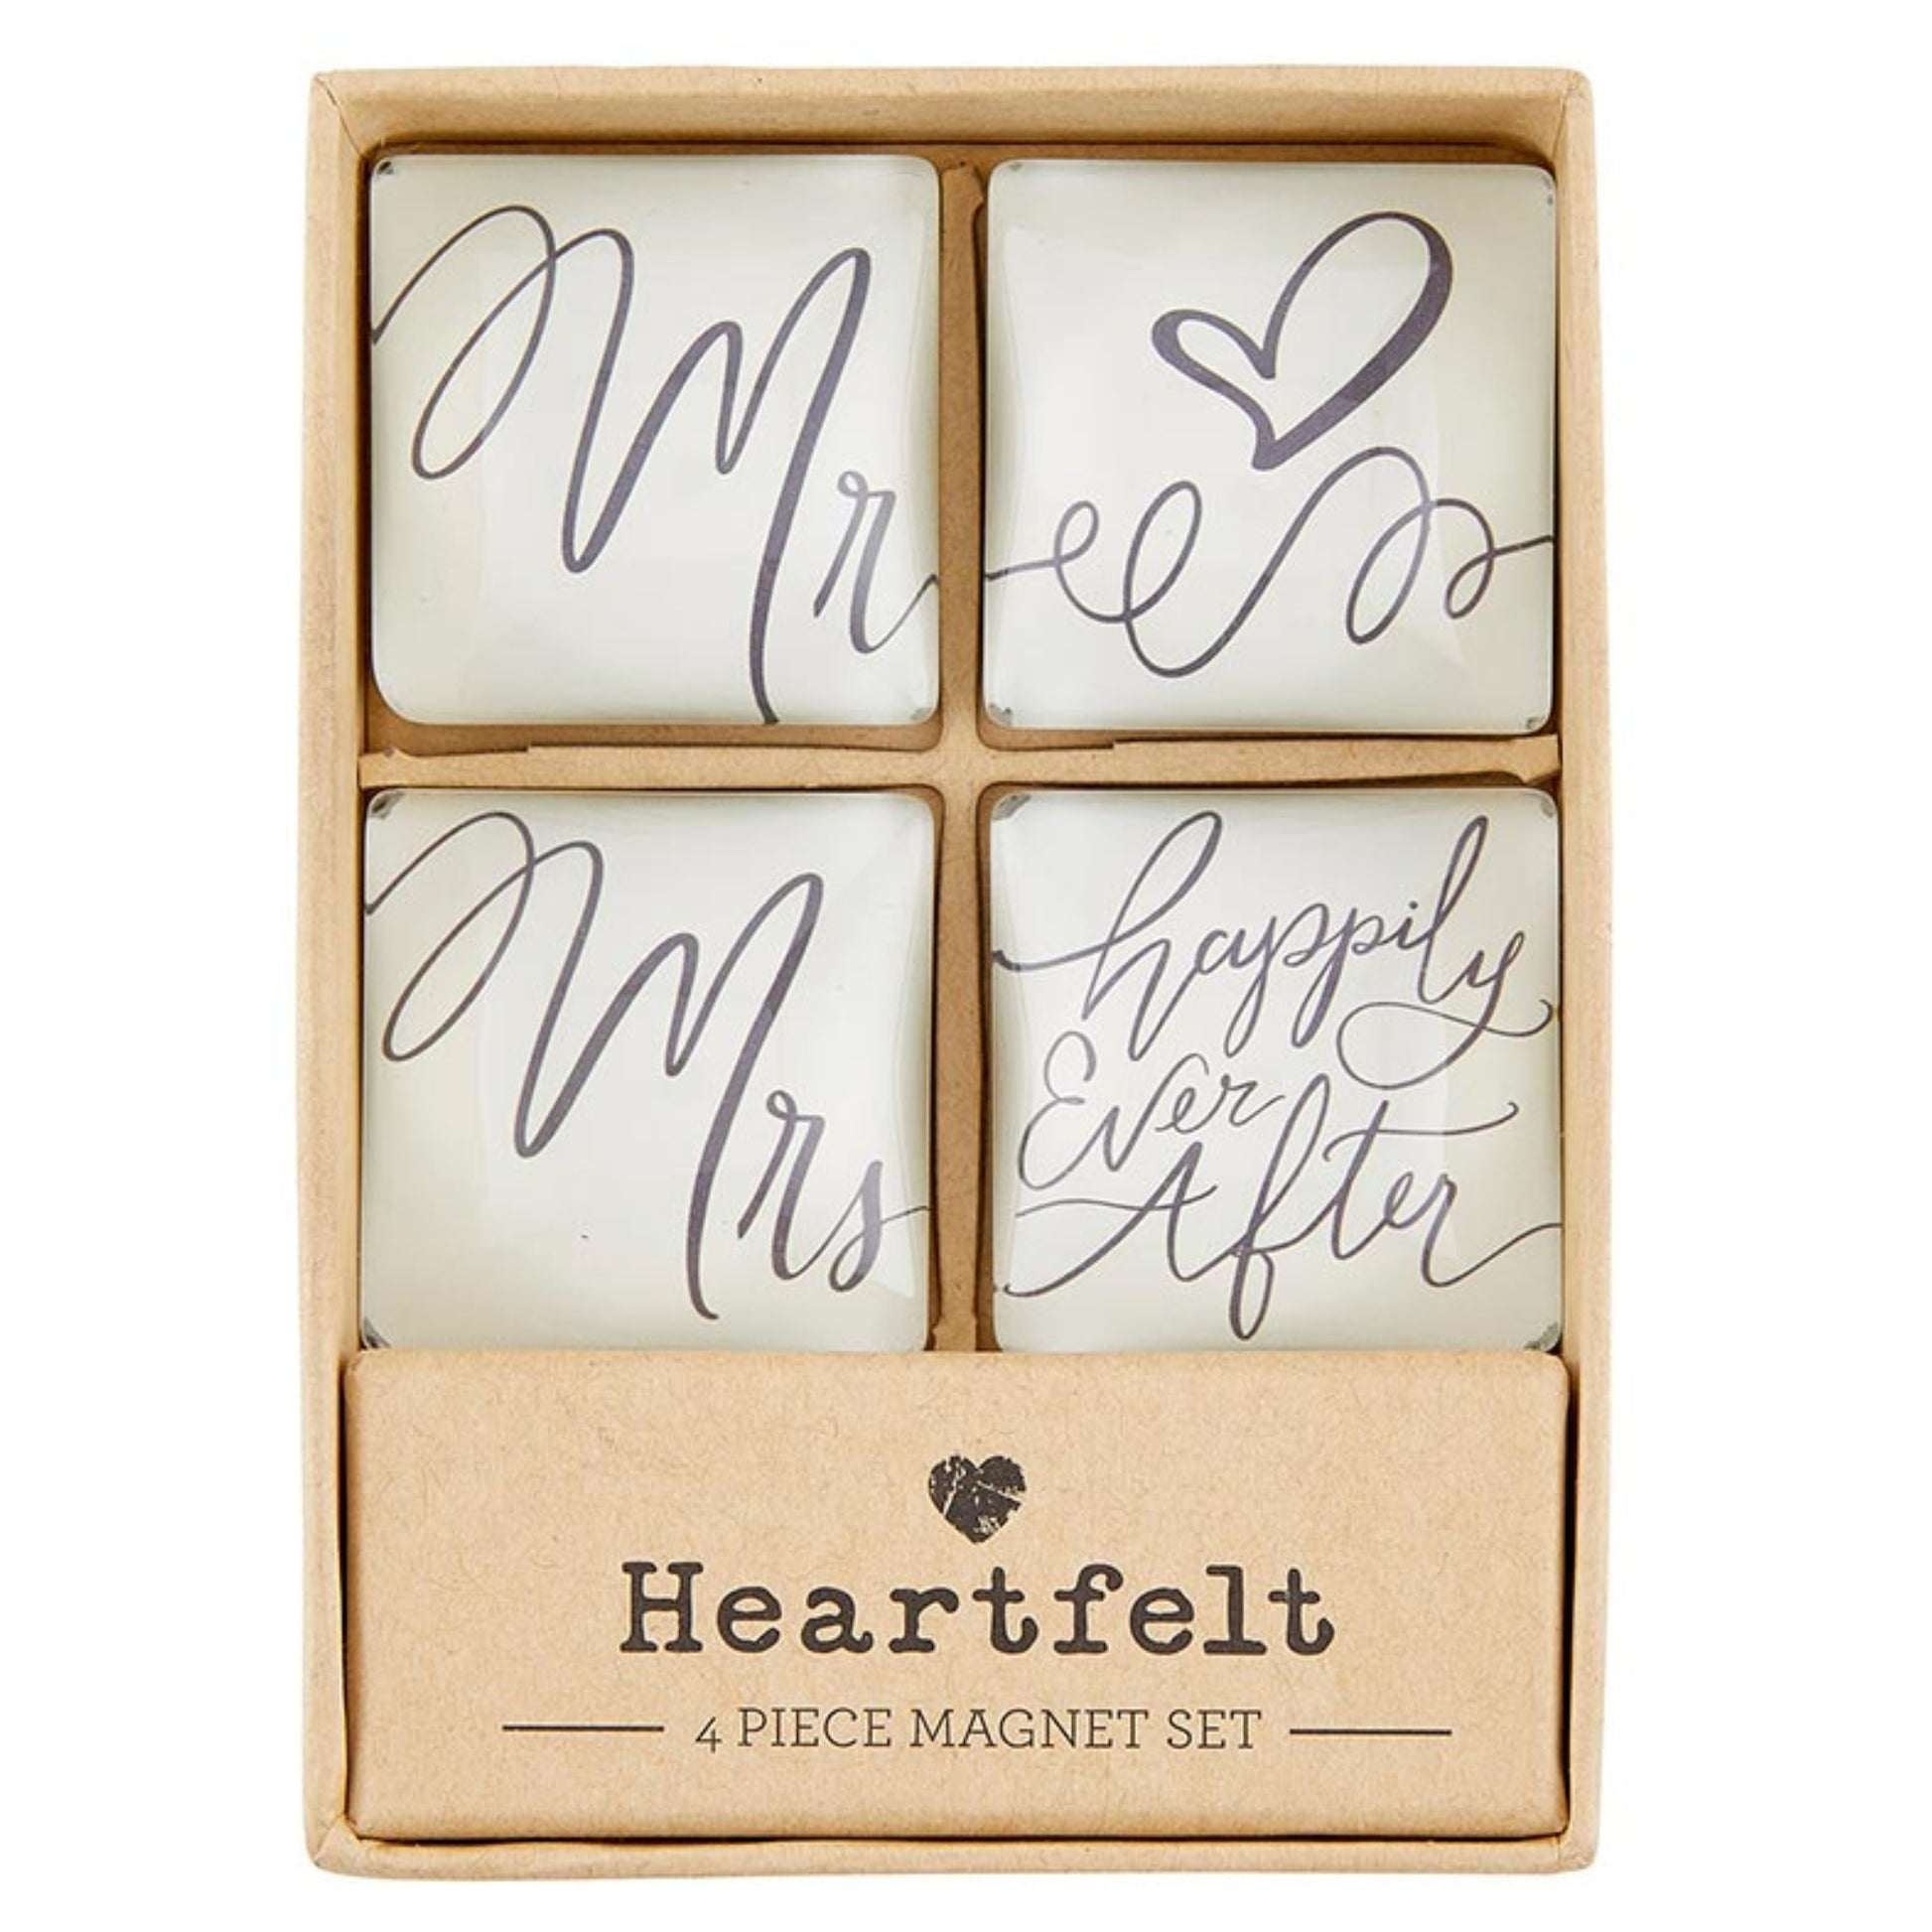 Mr & Mrs - Happily Ever After Glass Magnet Set - Wedding Gift - Anniversary Gift shown in gift box | oak7west.com